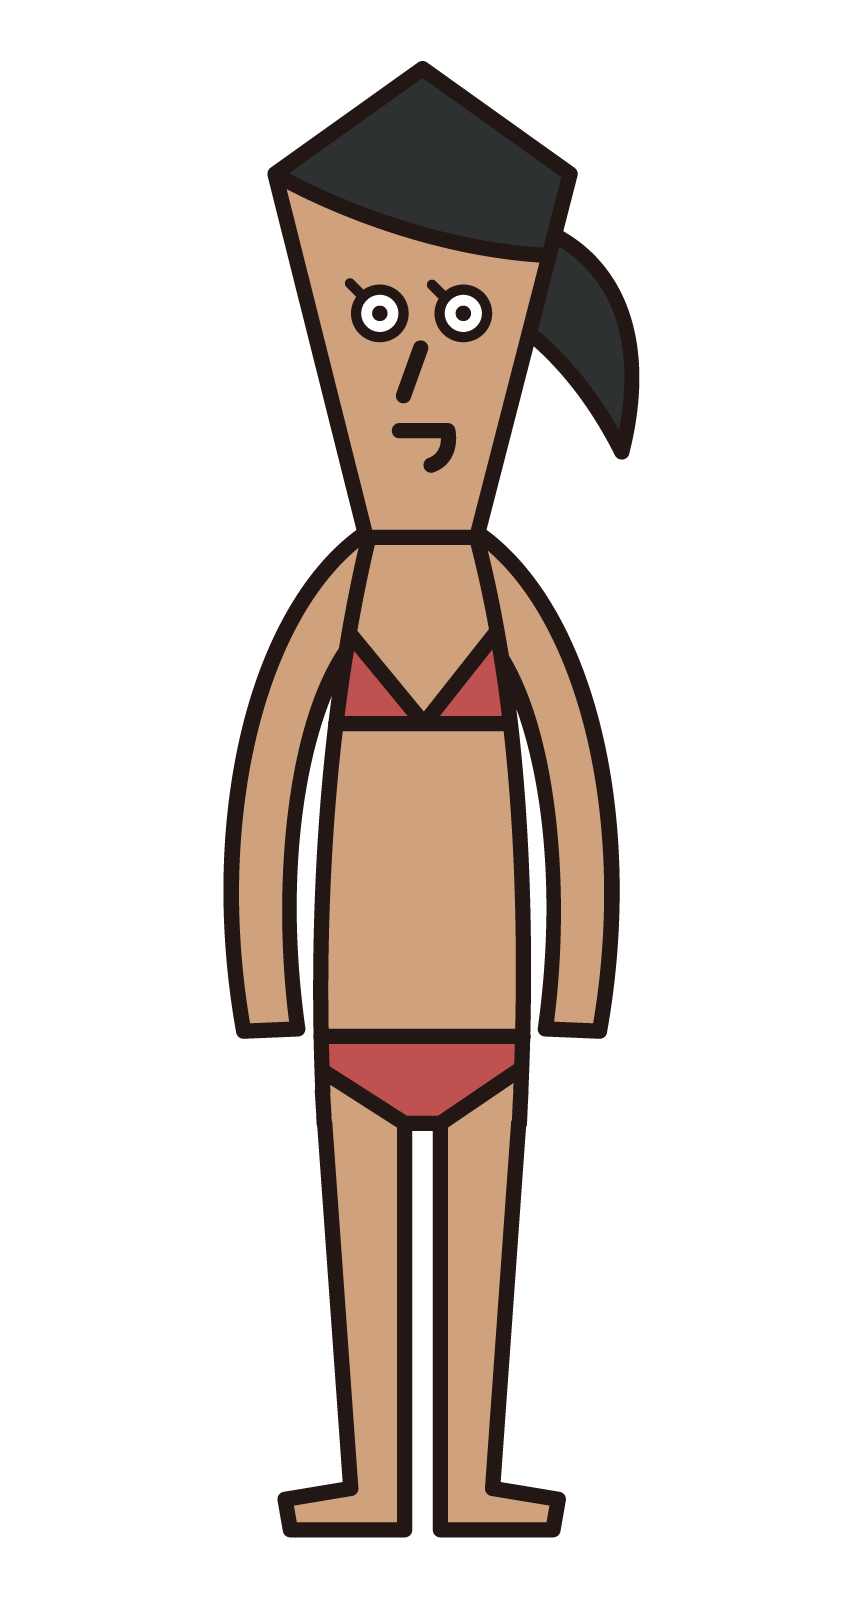 Illustration of a woman in a swimsuit